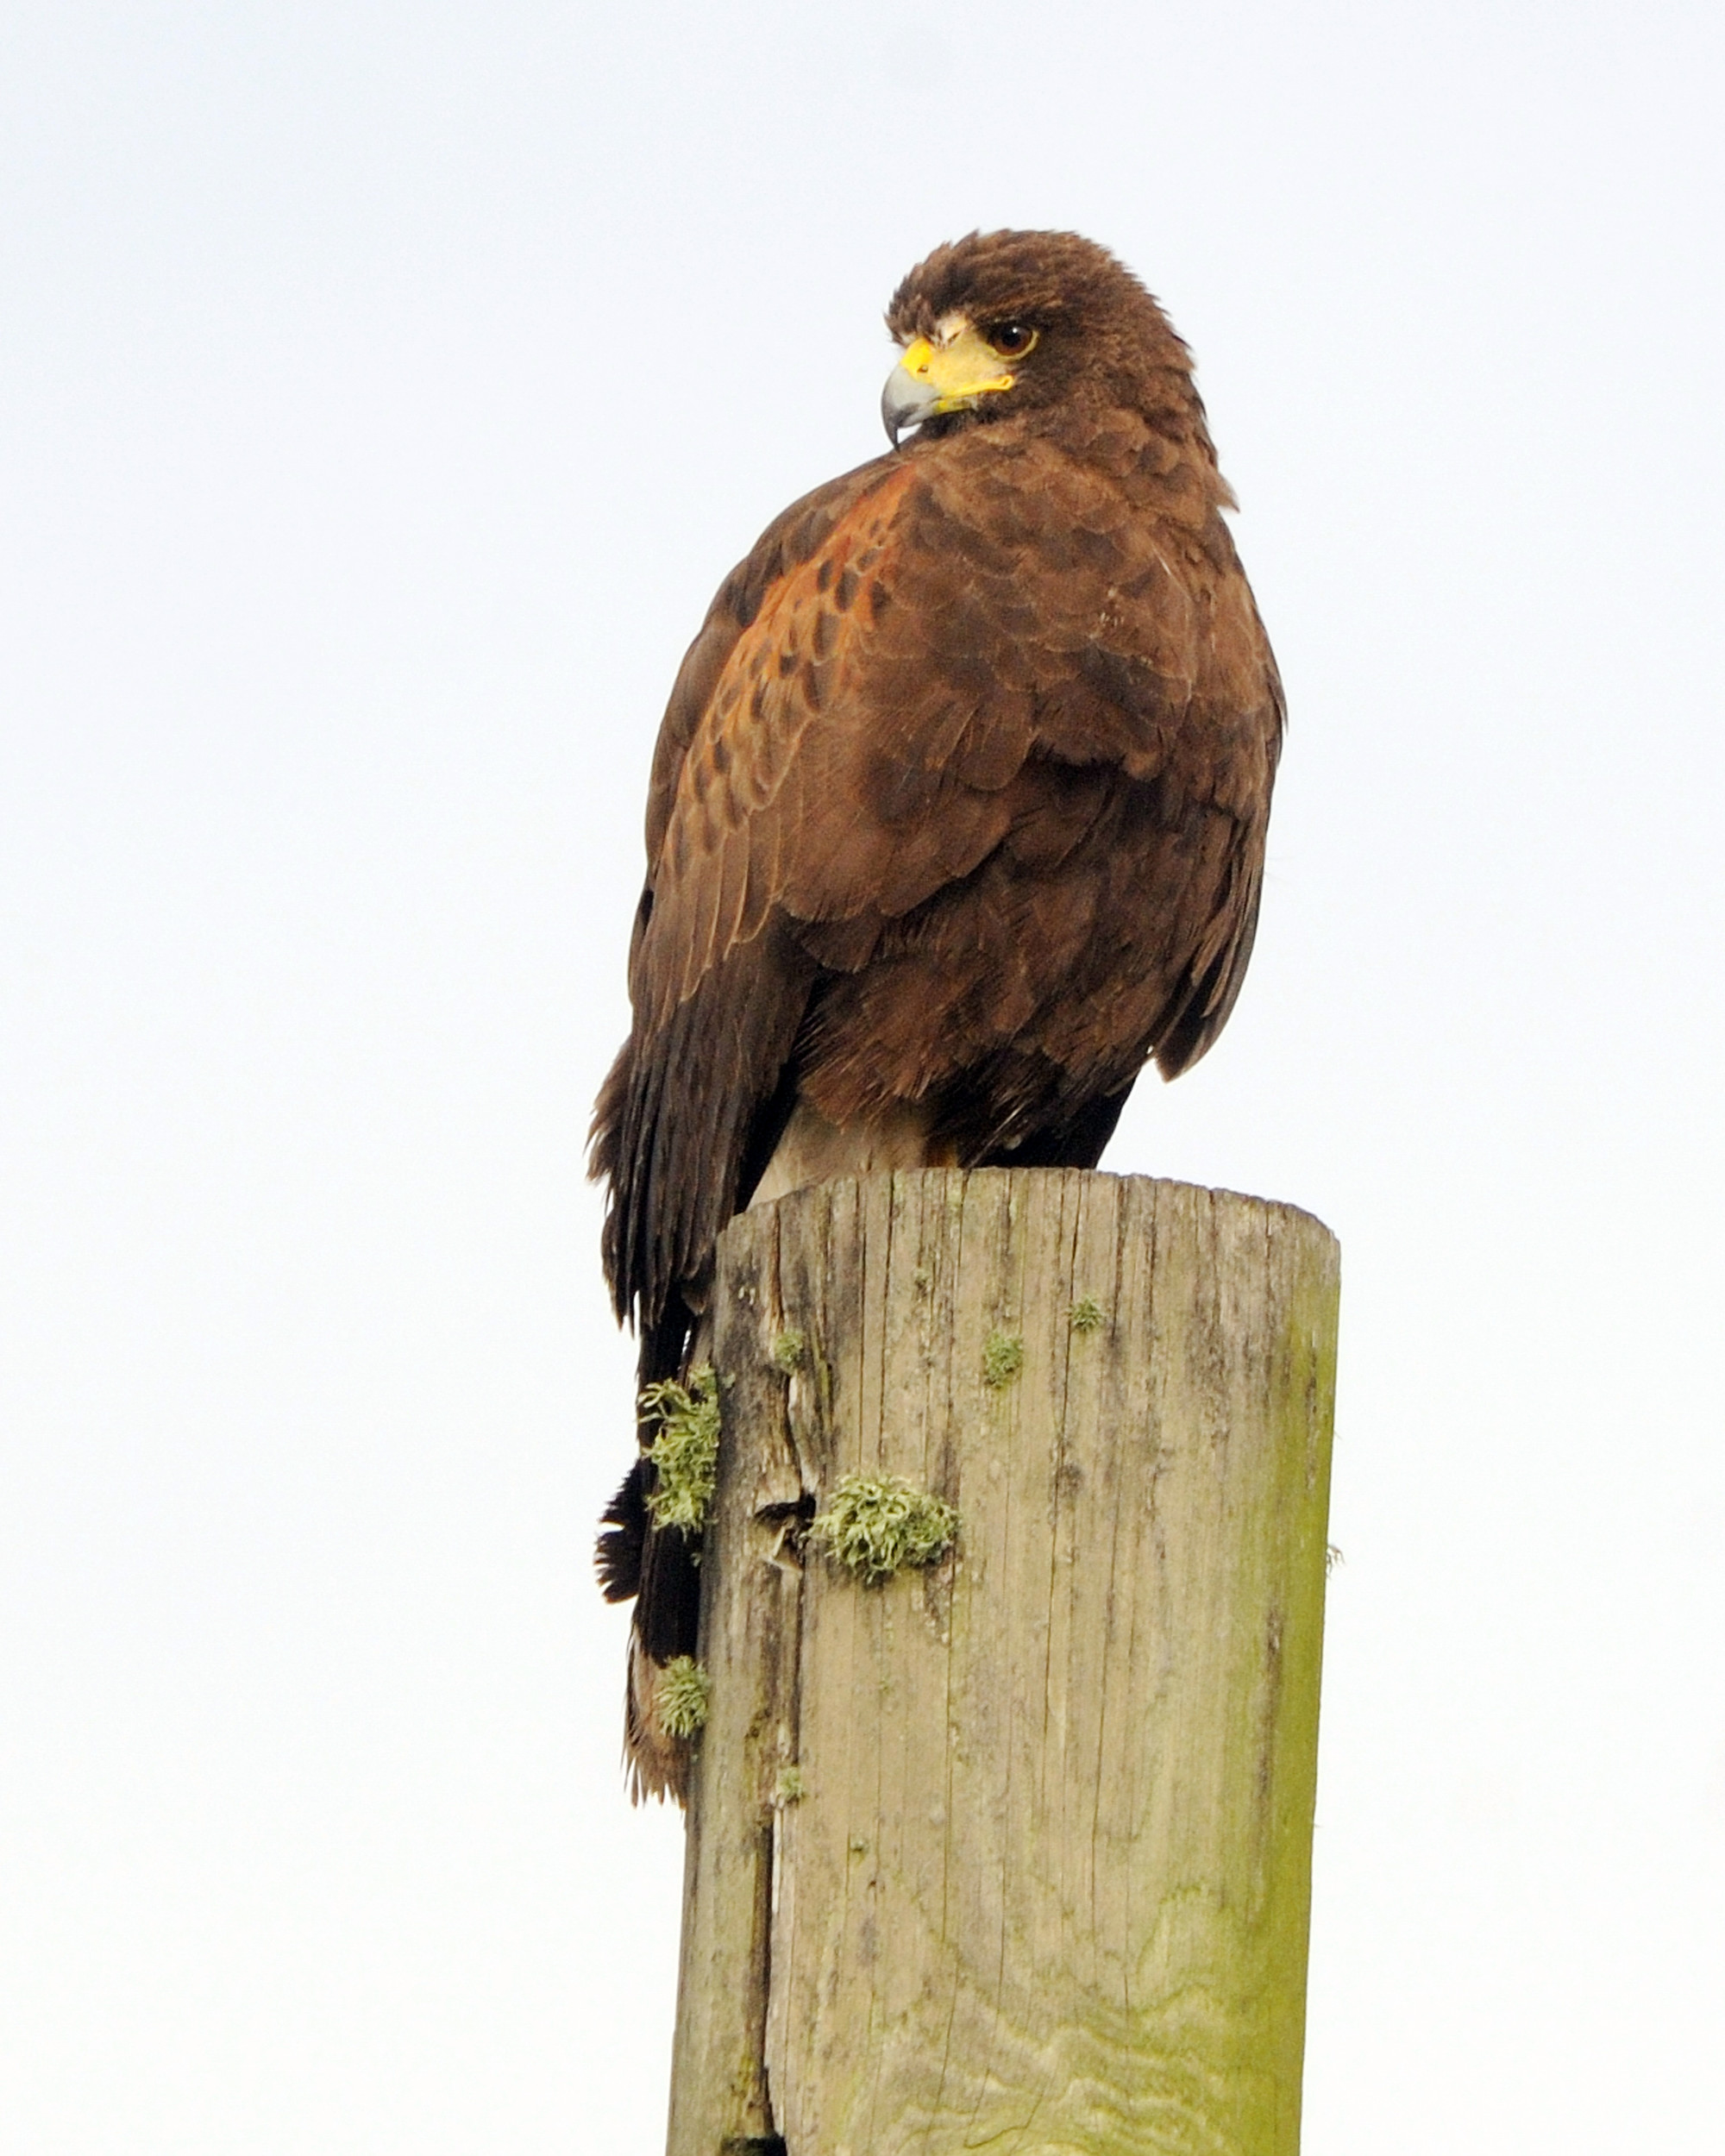 This Harris’s Hawk is not a species that typically travels to lower Alabama during the winter. Birder and 5 Rivers Educator Kathy Hicks said winter is a great time to spot vagrant birds that are traveling and searching for food.